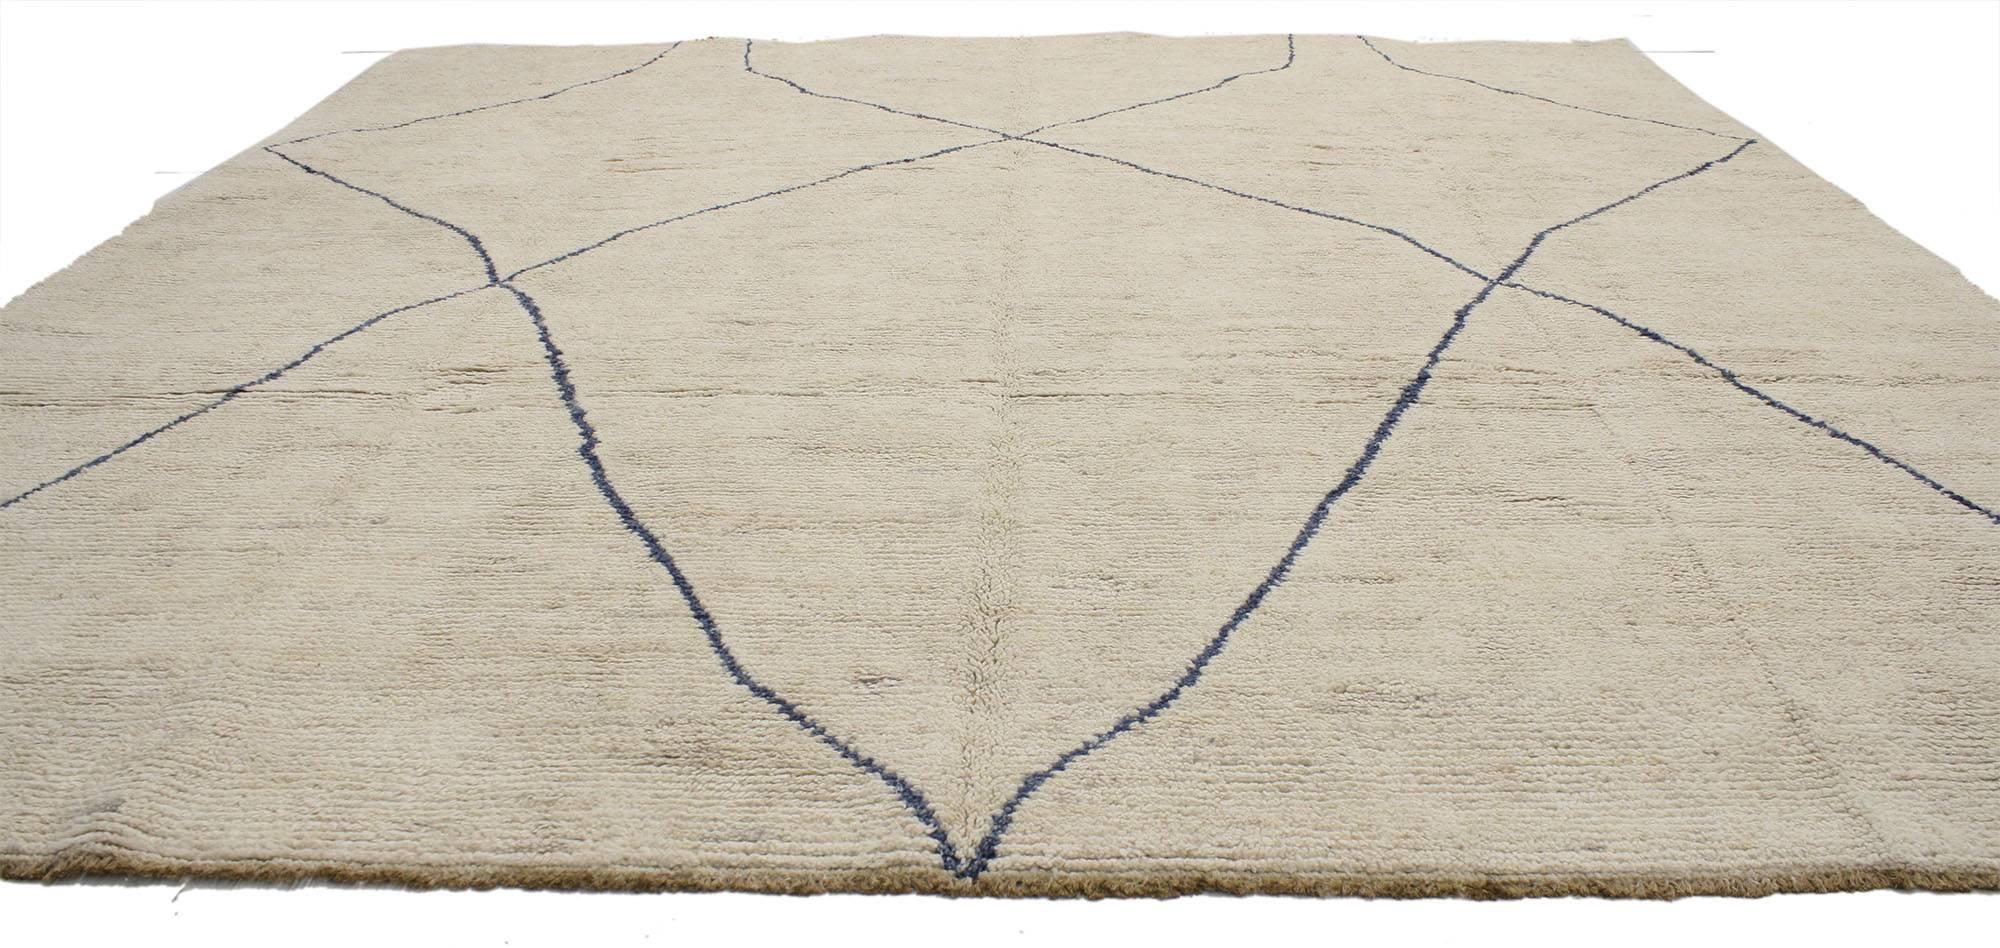 80437, contemporary Moroccan style rug with modern design square rug. This Moroccan style square rug features well-defined bluish lines on a creamy-beige field creating a modern design attracting the viewer with its expressive pattern and cozy,